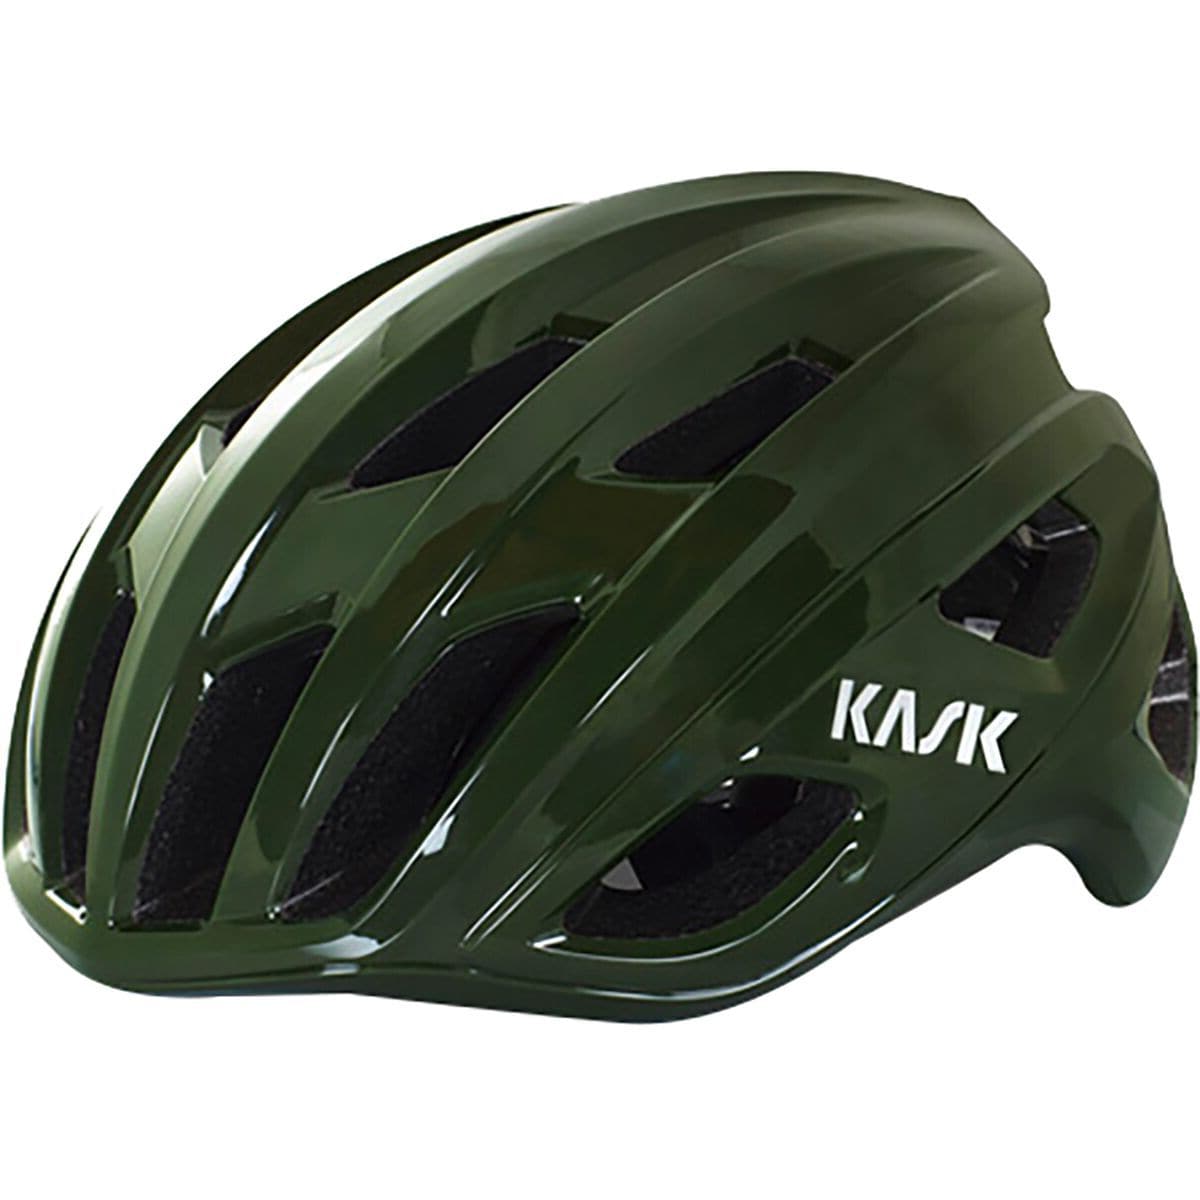 Kask Mojito Cubed